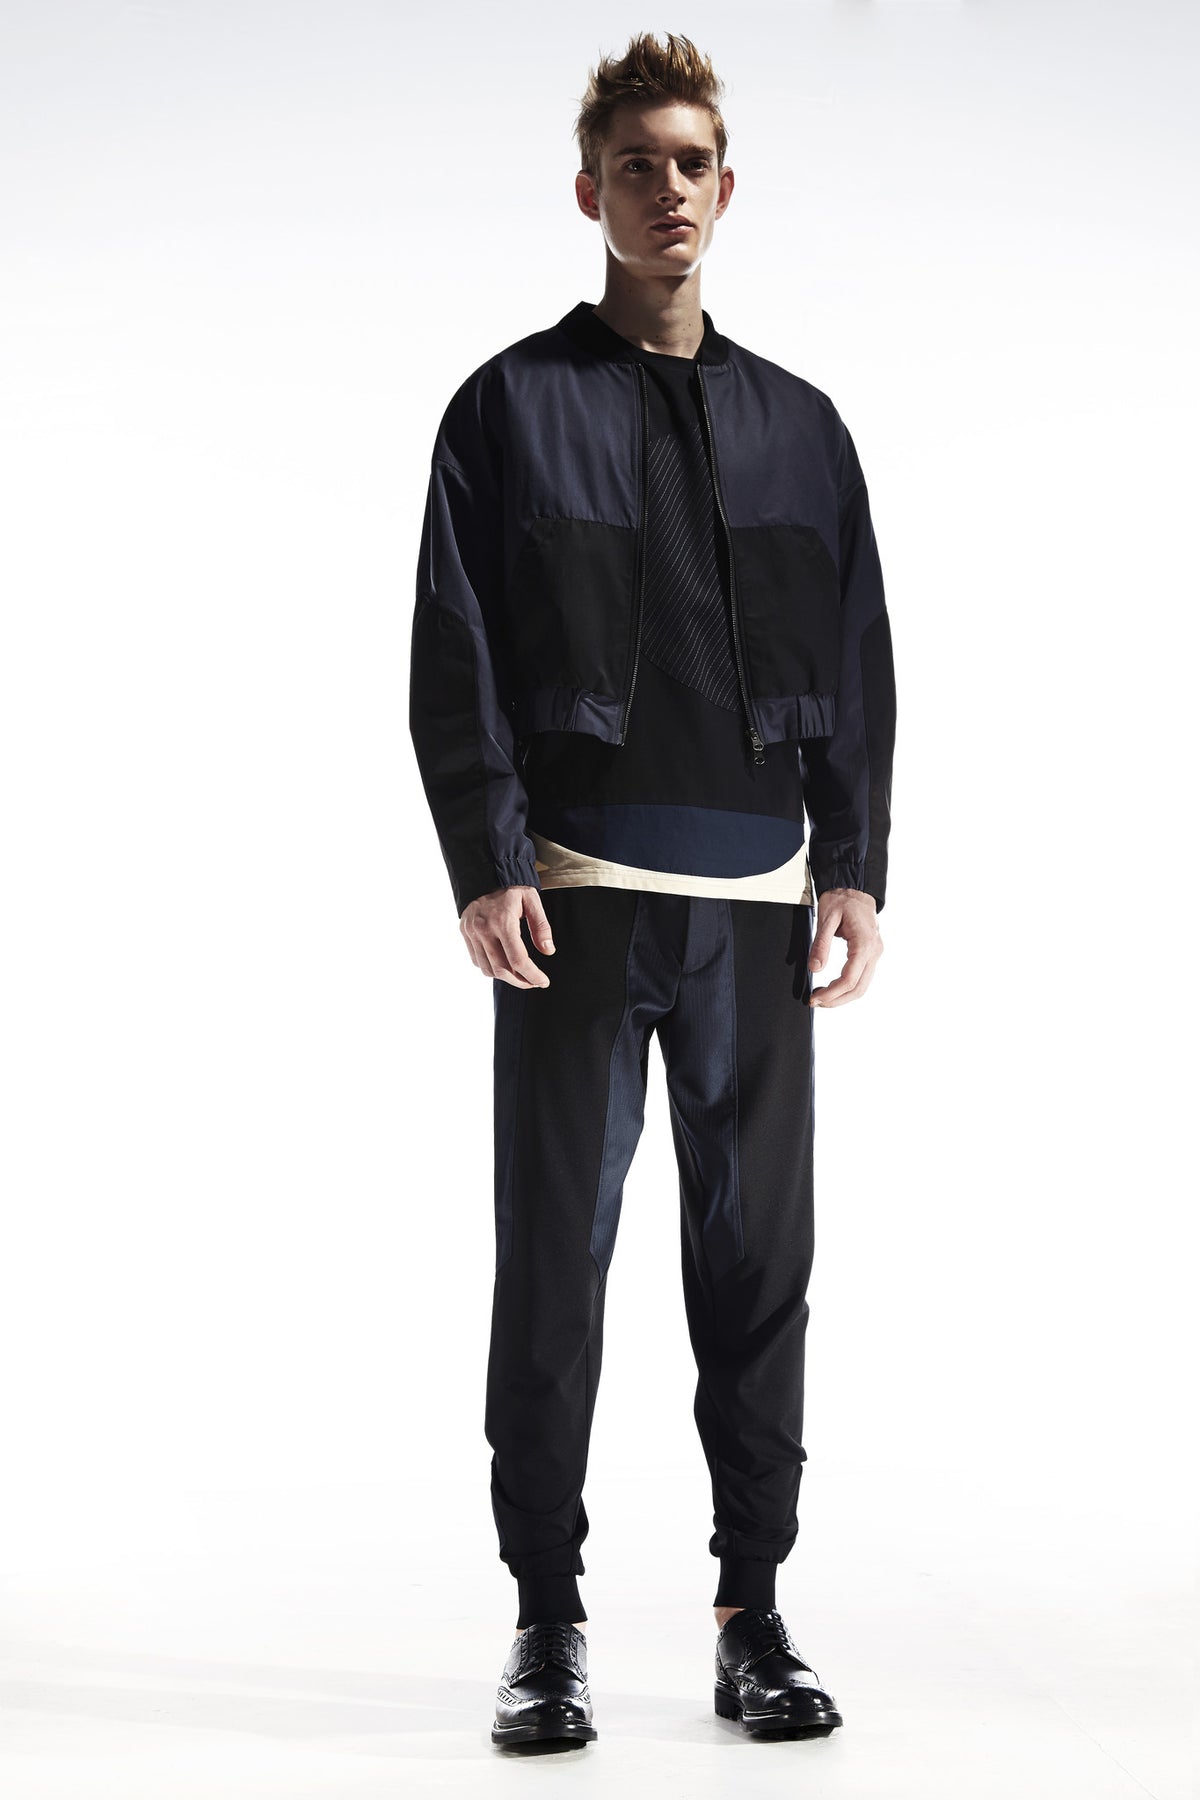 OUTTERS - BOMBER JAKET WITH DETACHABLE LAYER